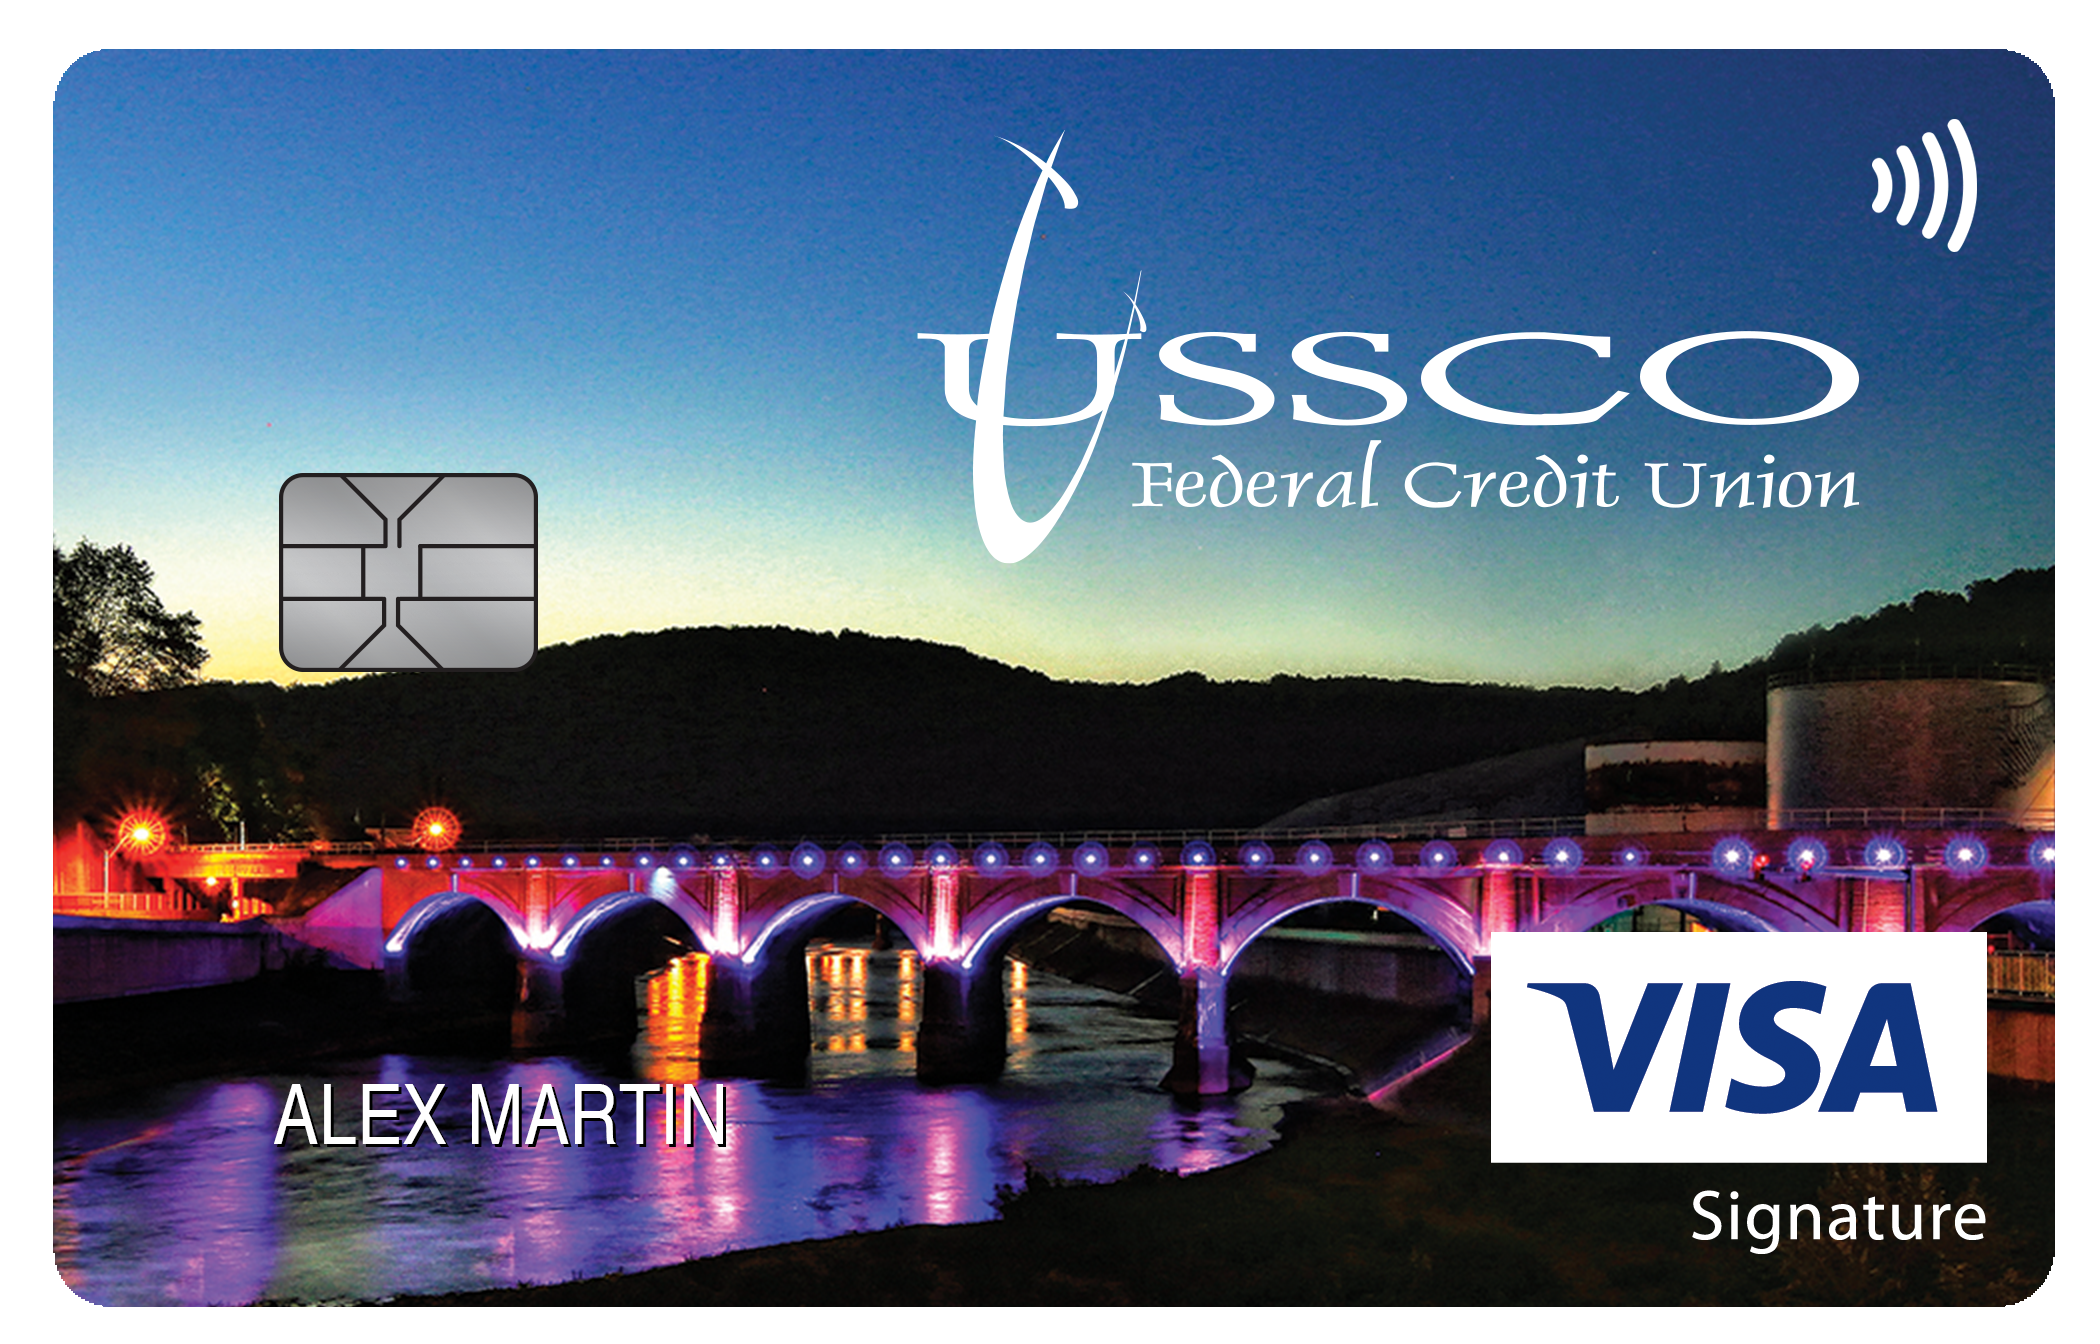 USSCO Federal Credit Union